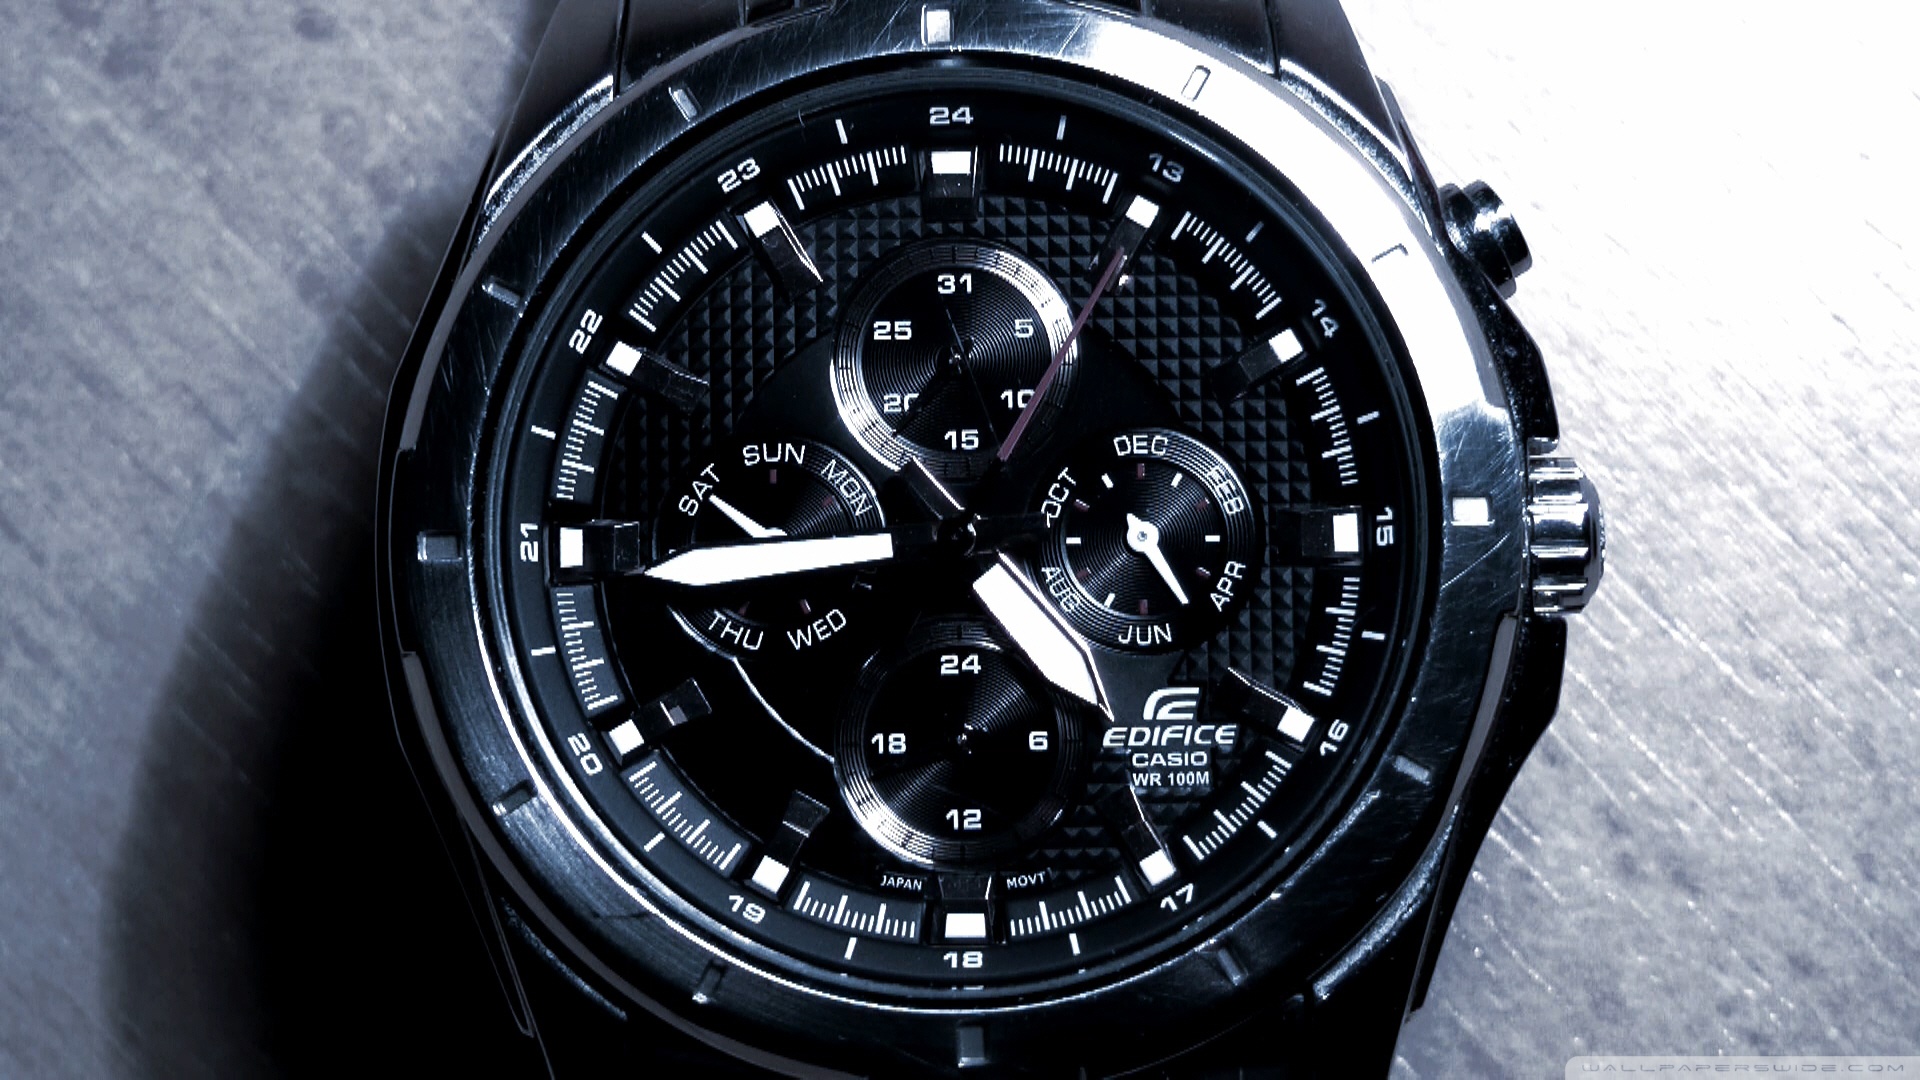 Standard - Hd Images Of Watches , HD Wallpaper & Backgrounds